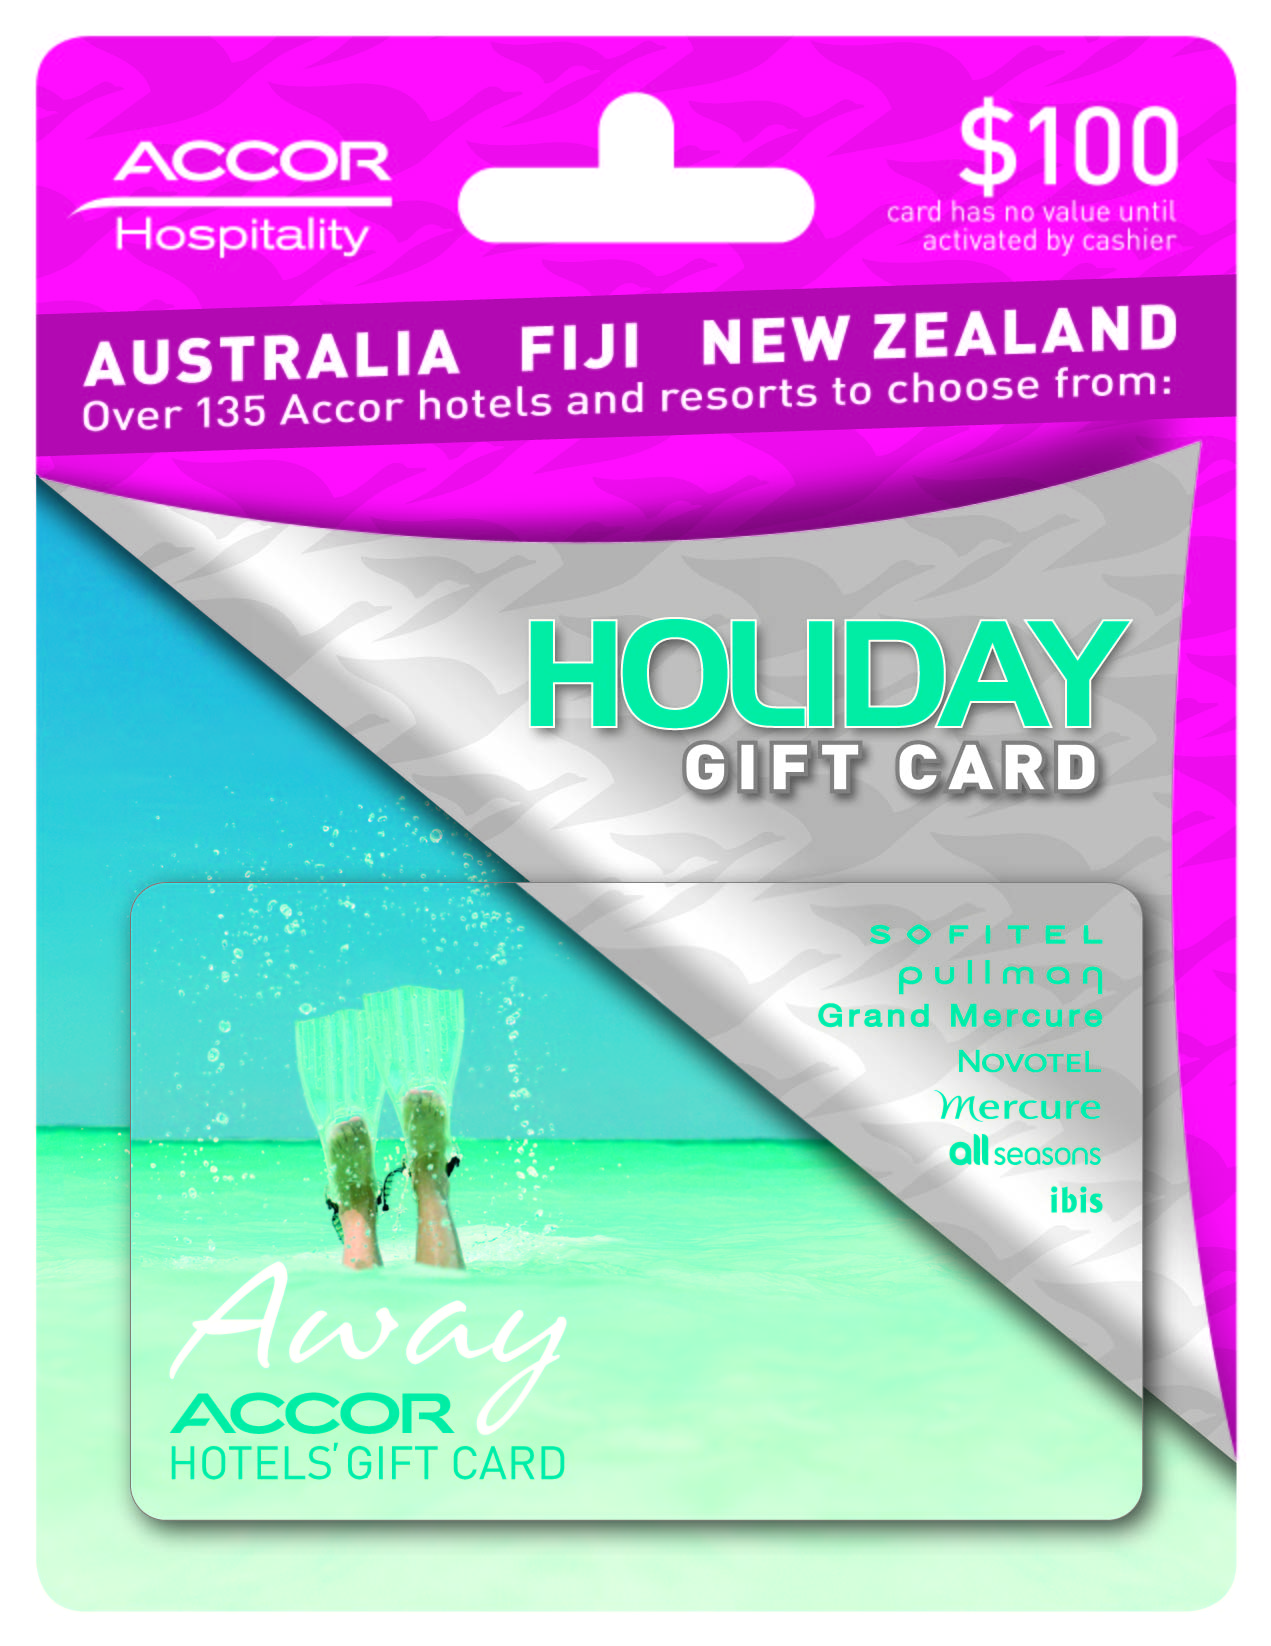 Take the hassle out of gift shopping  with an AccorHotels Gift Card